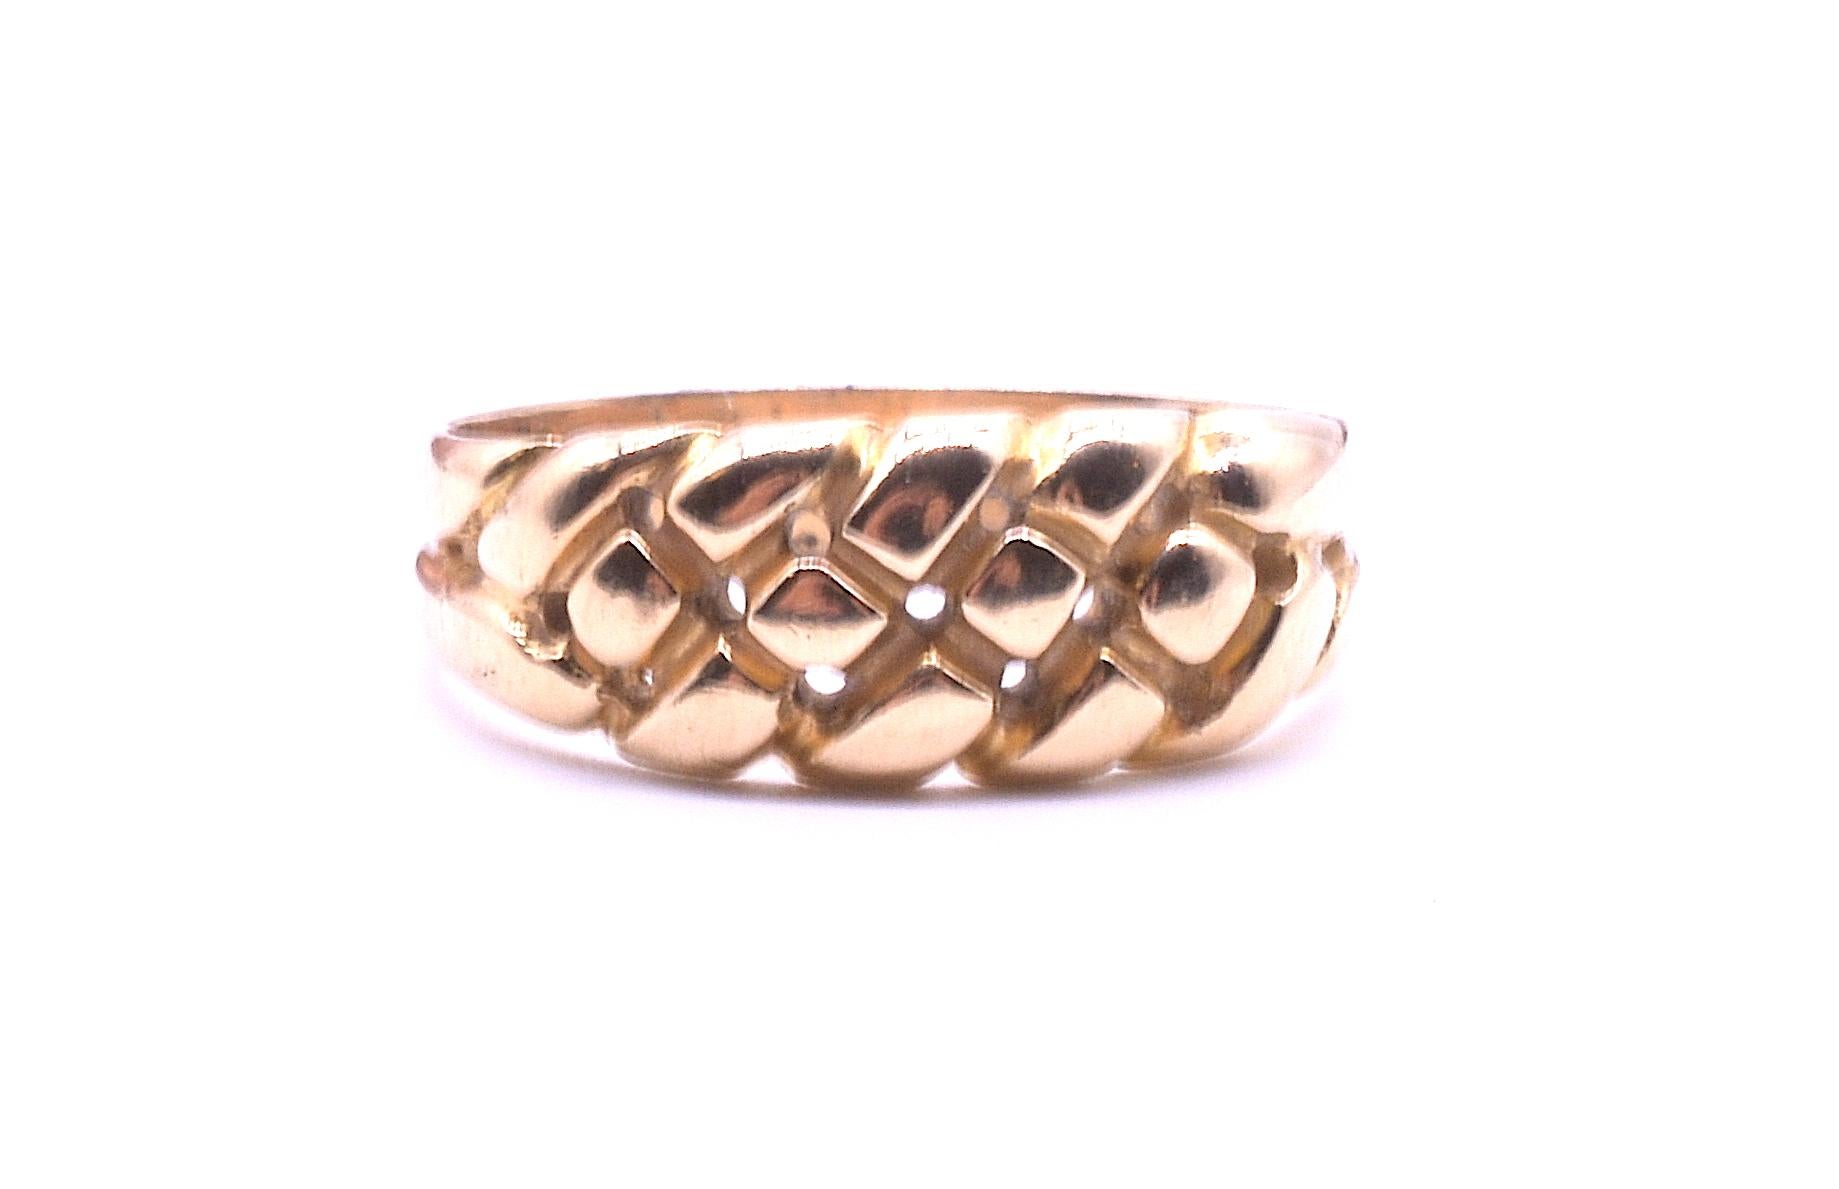 Hallmarked Birmingham for 1896 and crafted in 18K yellow gold, our antique keeper ring has three rows of braided gold work. There are small air holes on the underside allowing for the release of water when the ring gets wet. This ring can be worn